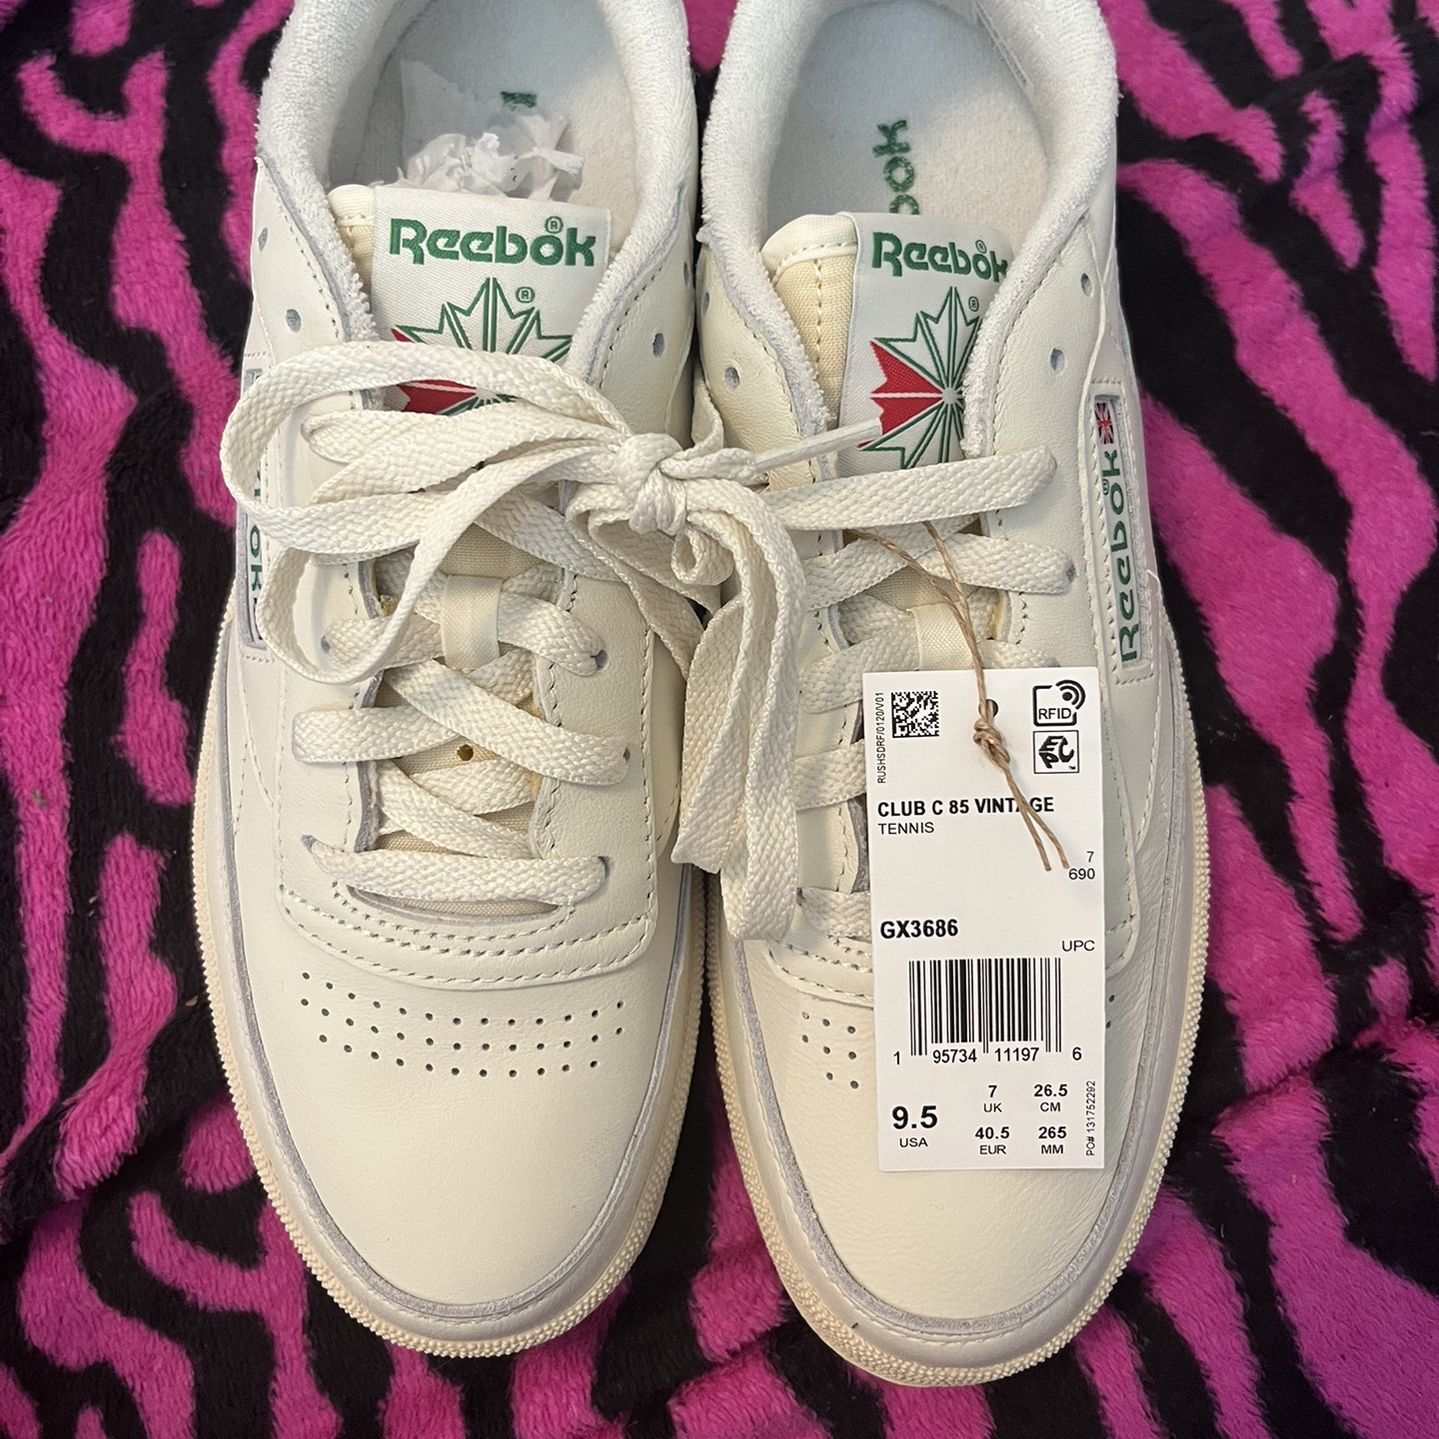 Flyvningen At læse Selvrespekt Women's 9.5 Reebok Club C 85 classic vintage style shoes GX3686 for Sale in  Los Angeles, CA - OfferUp